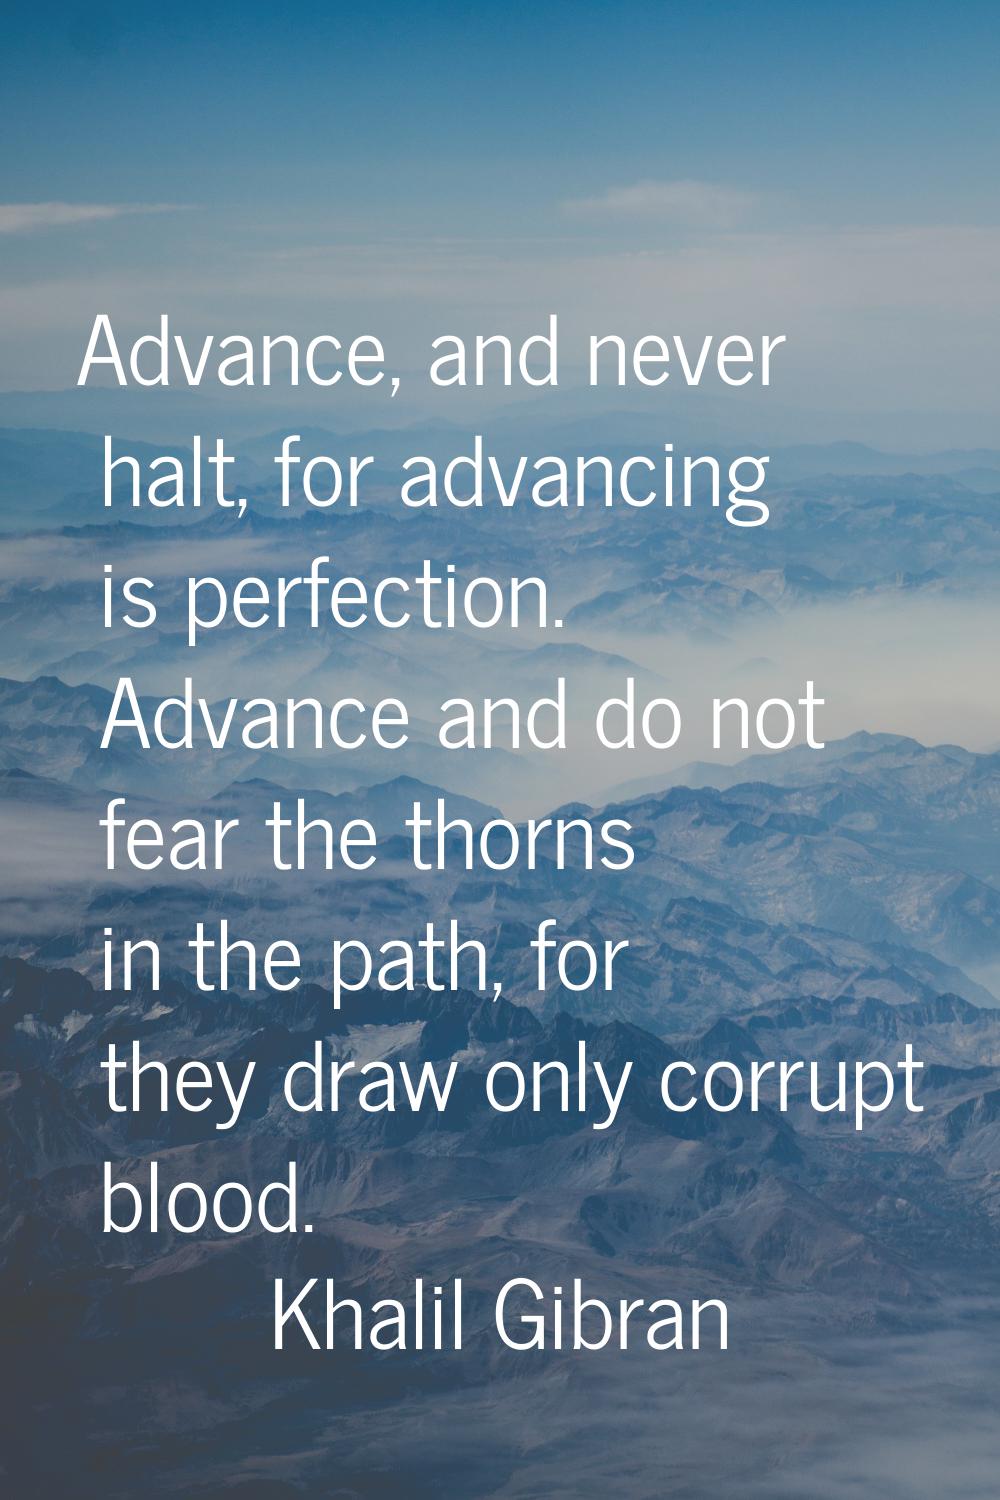 Advance, and never halt, for advancing is perfection. Advance and do not fear the thorns in the pat